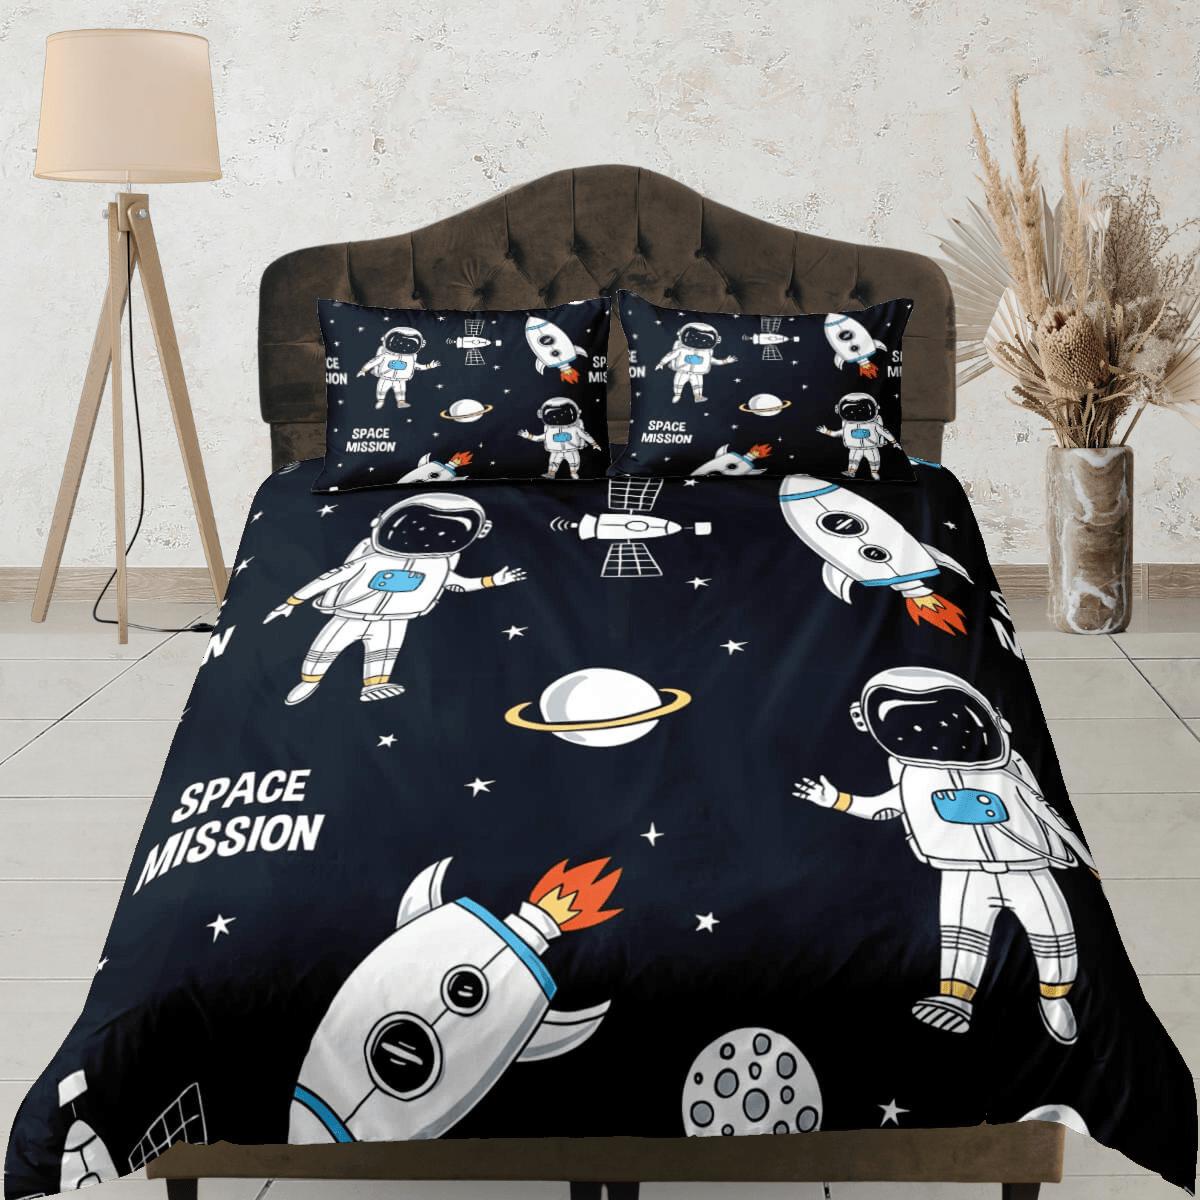 daintyduvet Space mission astronaut duvet cover set for kids, galaxy bedding set full, king, queen, dorm bedding, toddler bedding aesthetic bedspread